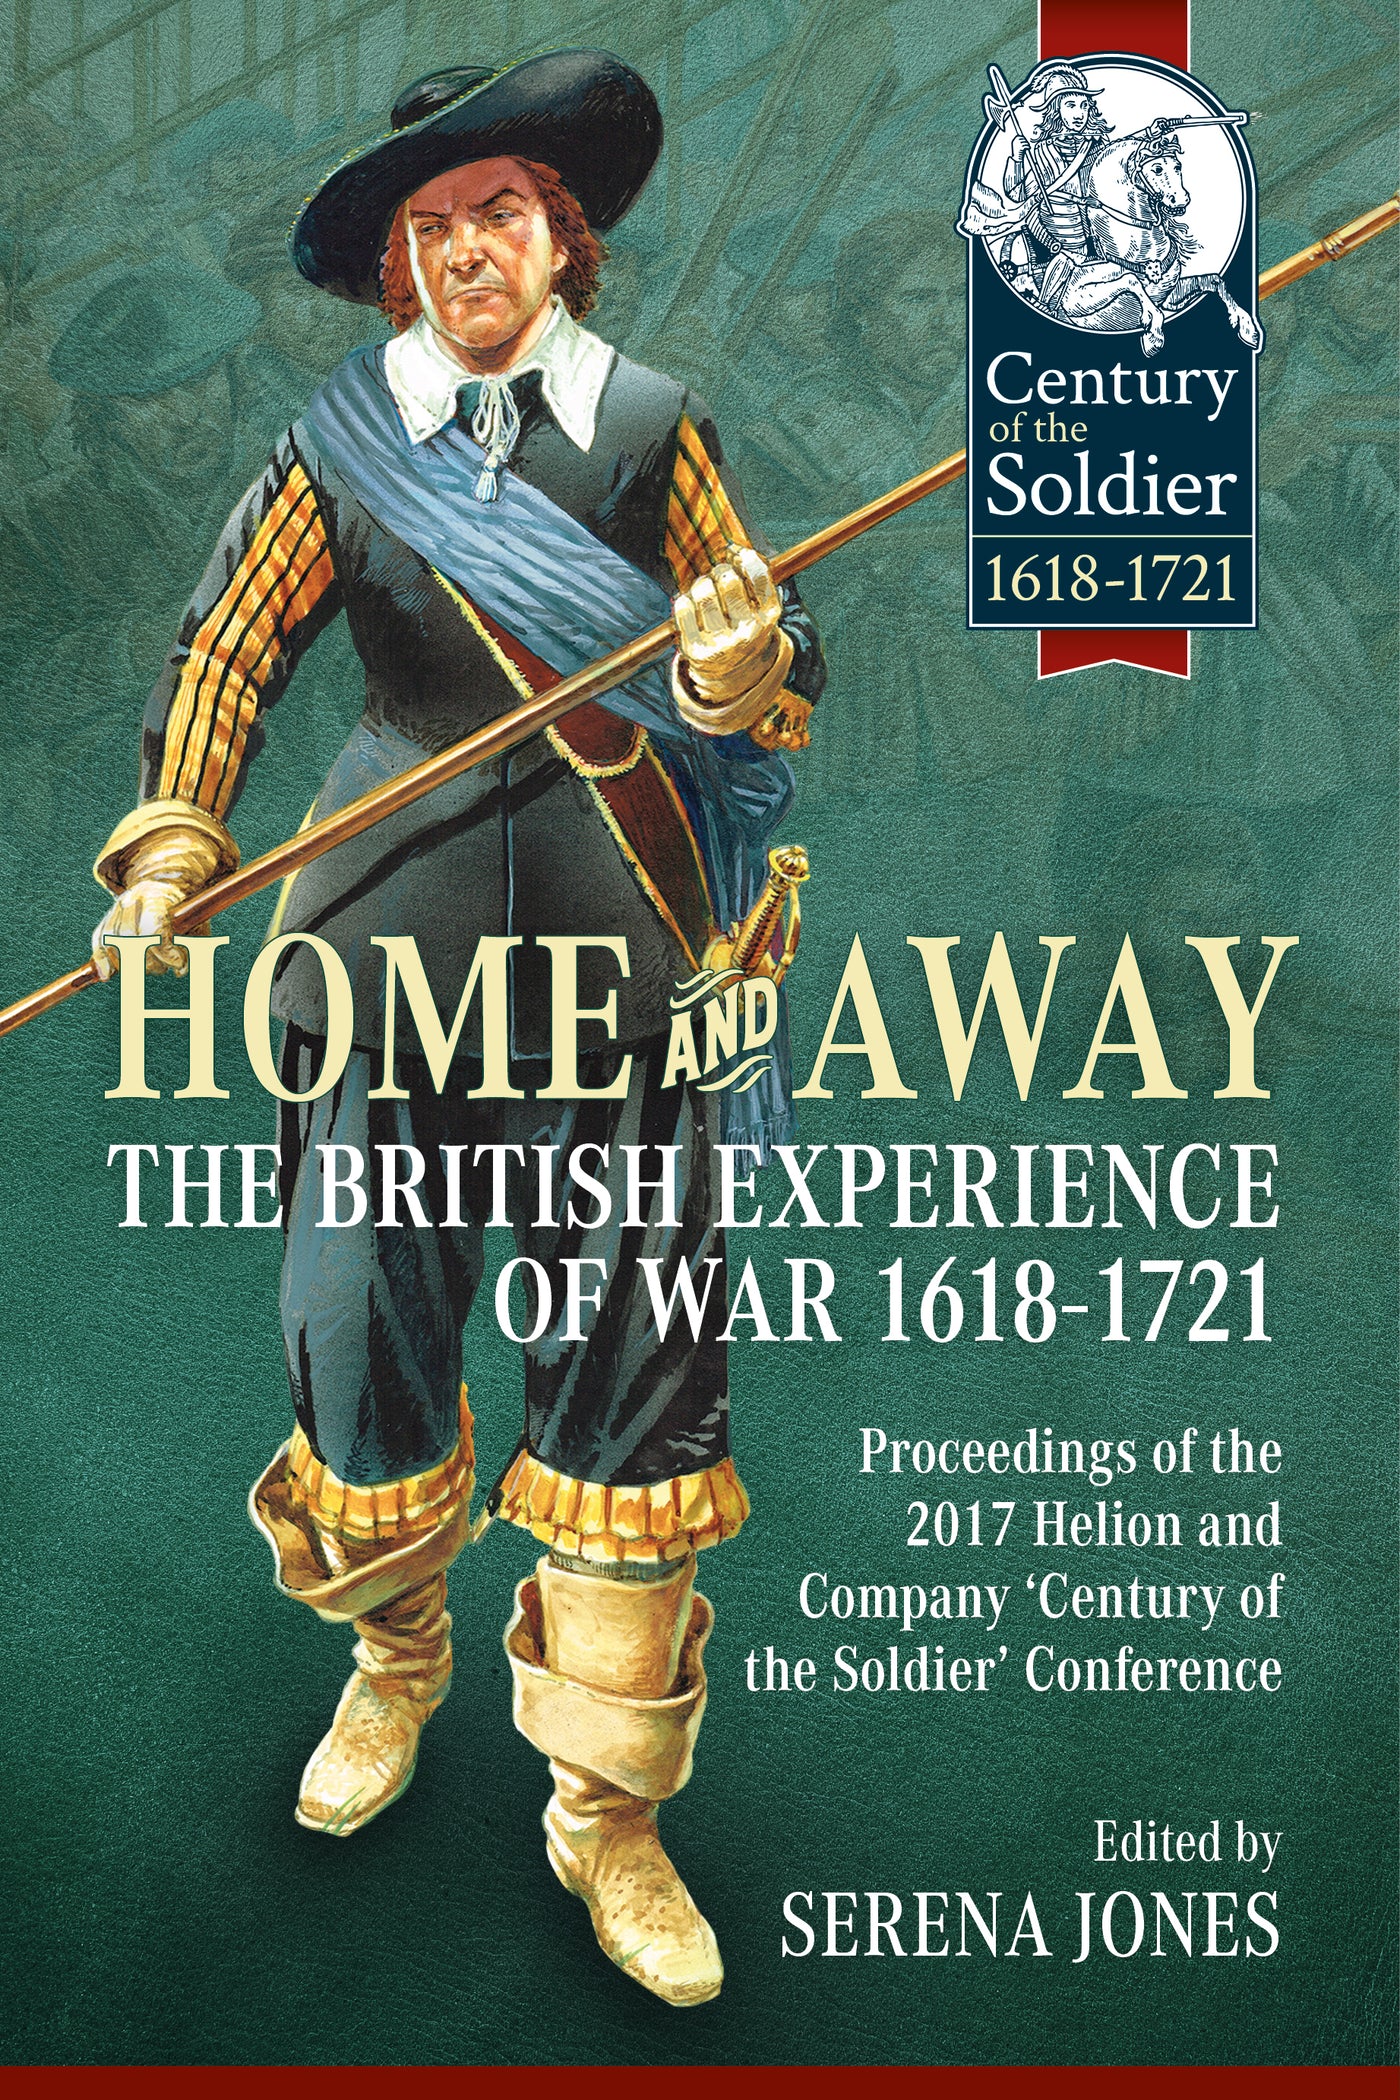 Home and Away: The British Experience of War 1618-1721